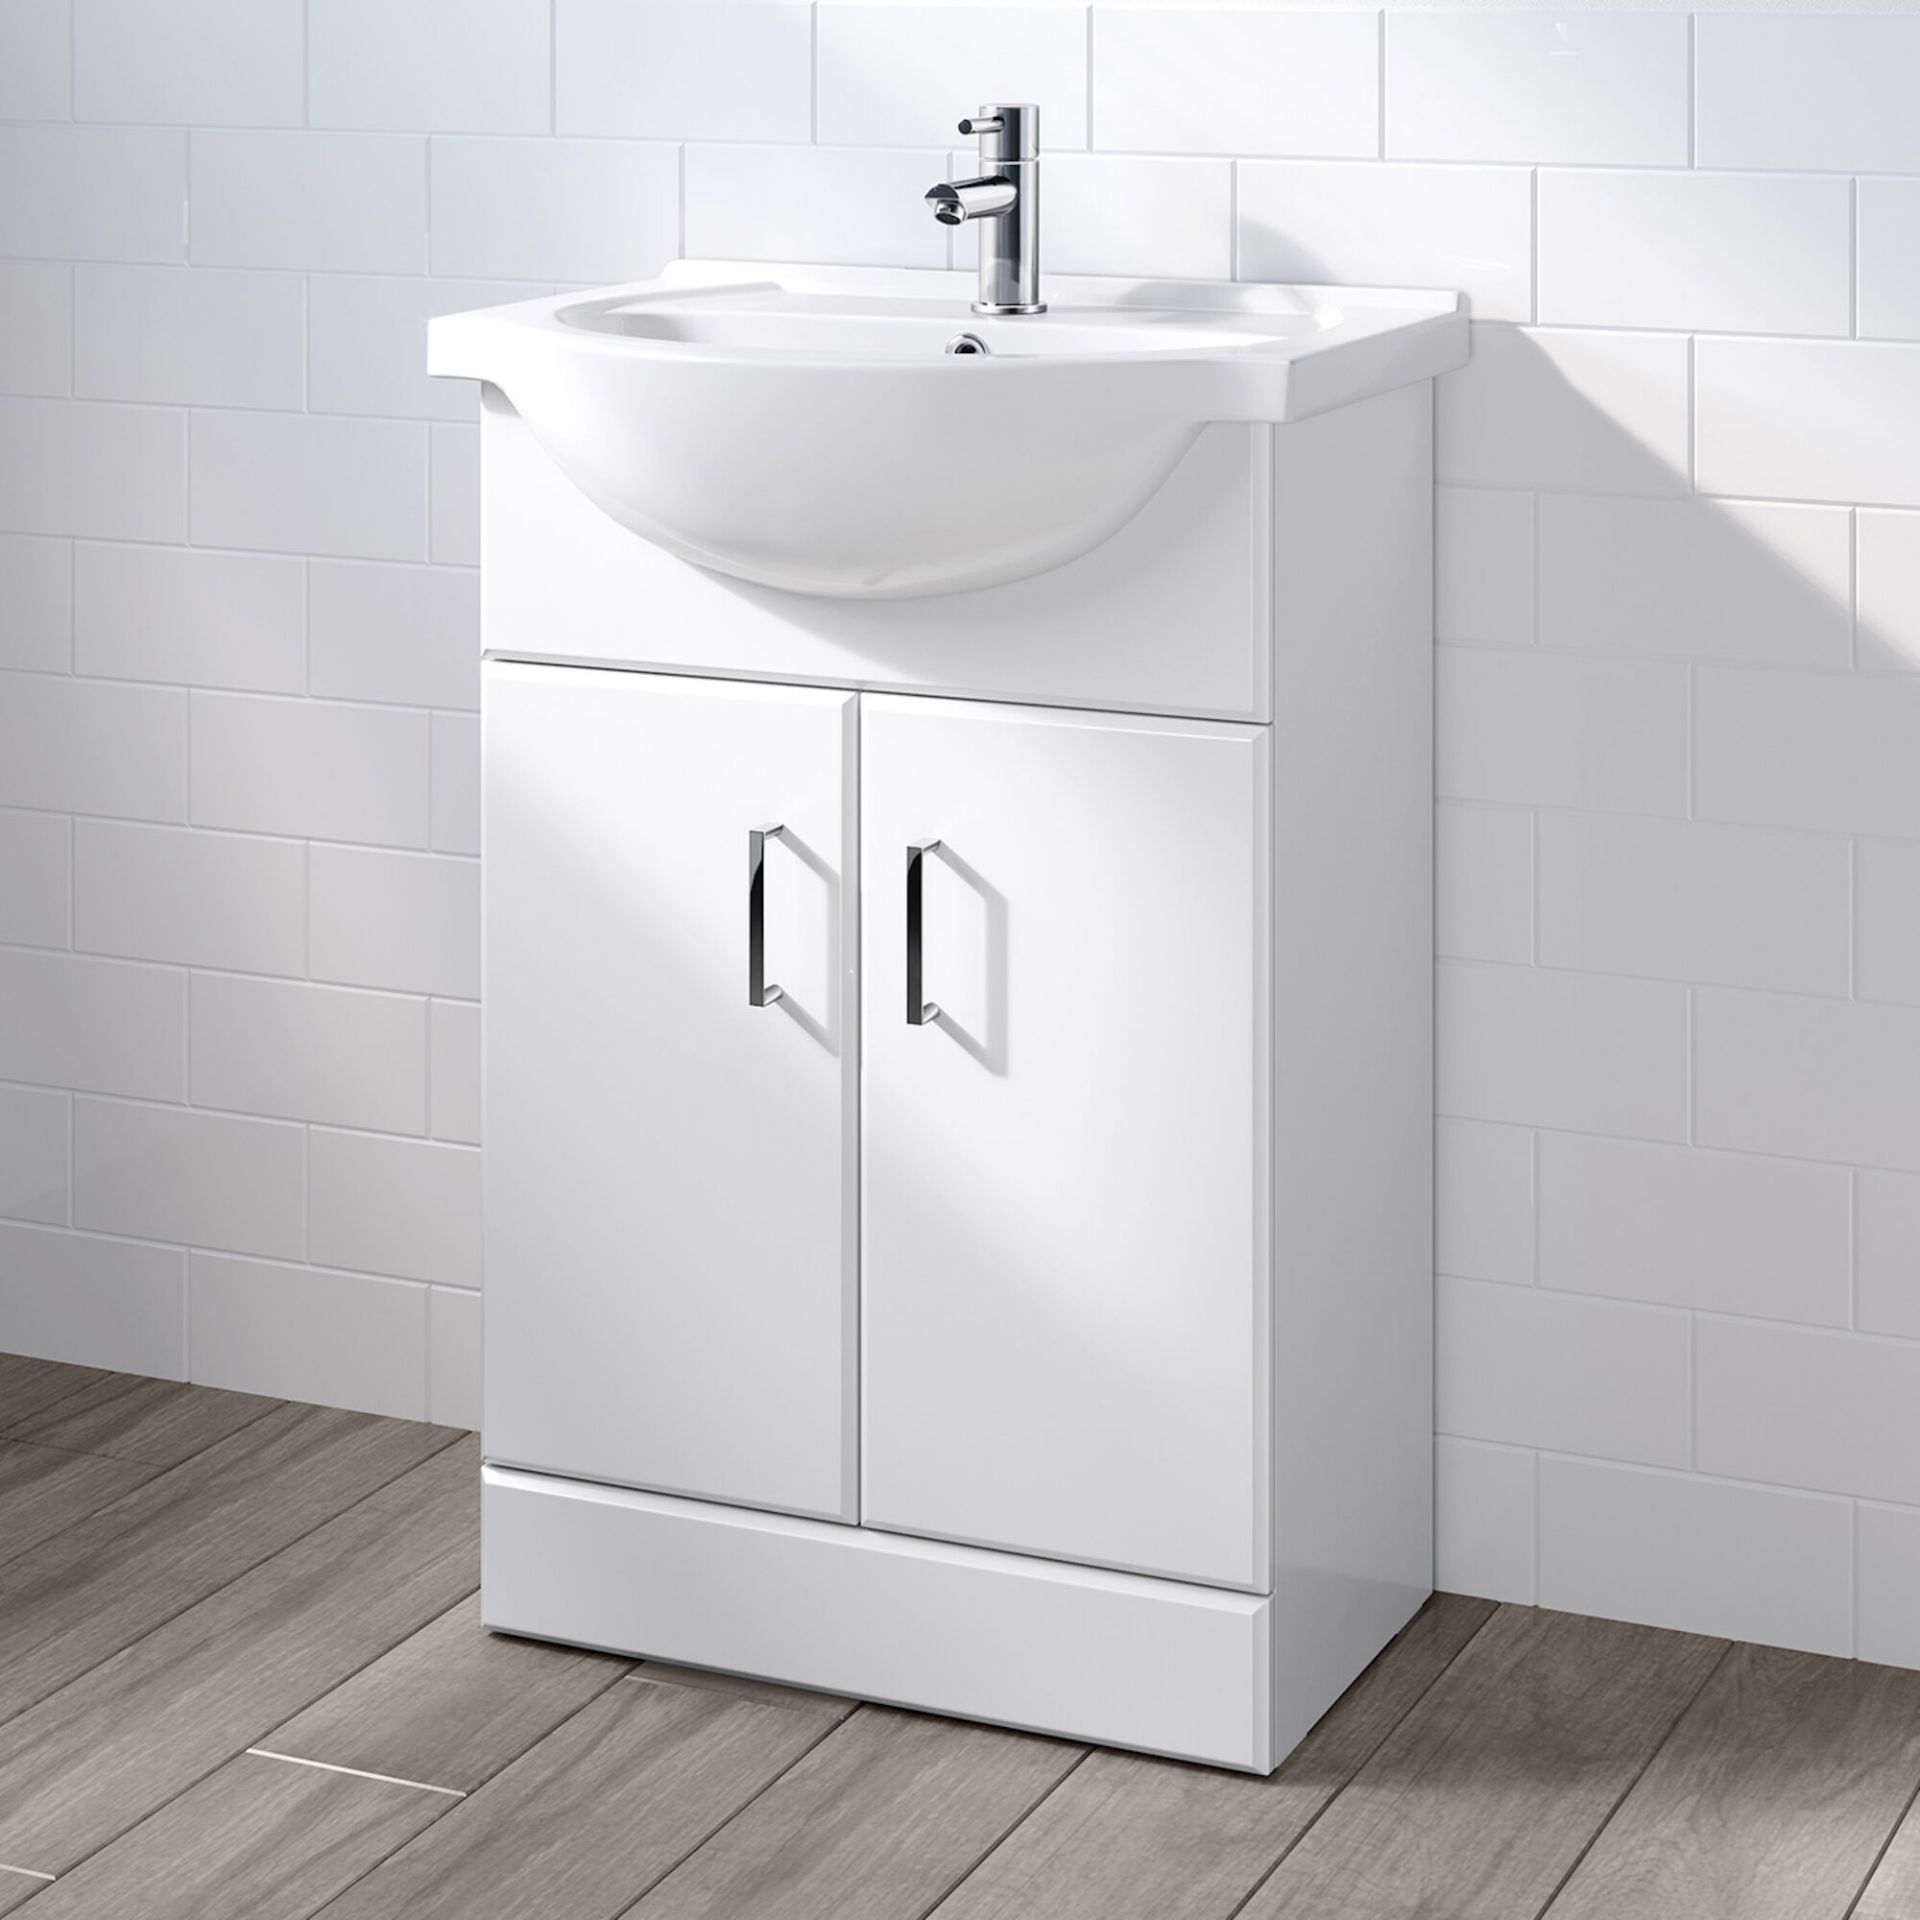 (YC50) 550x300mm Quartz Gloss White Built In Basin Cabinet. RRP £349.99. Comes complete with